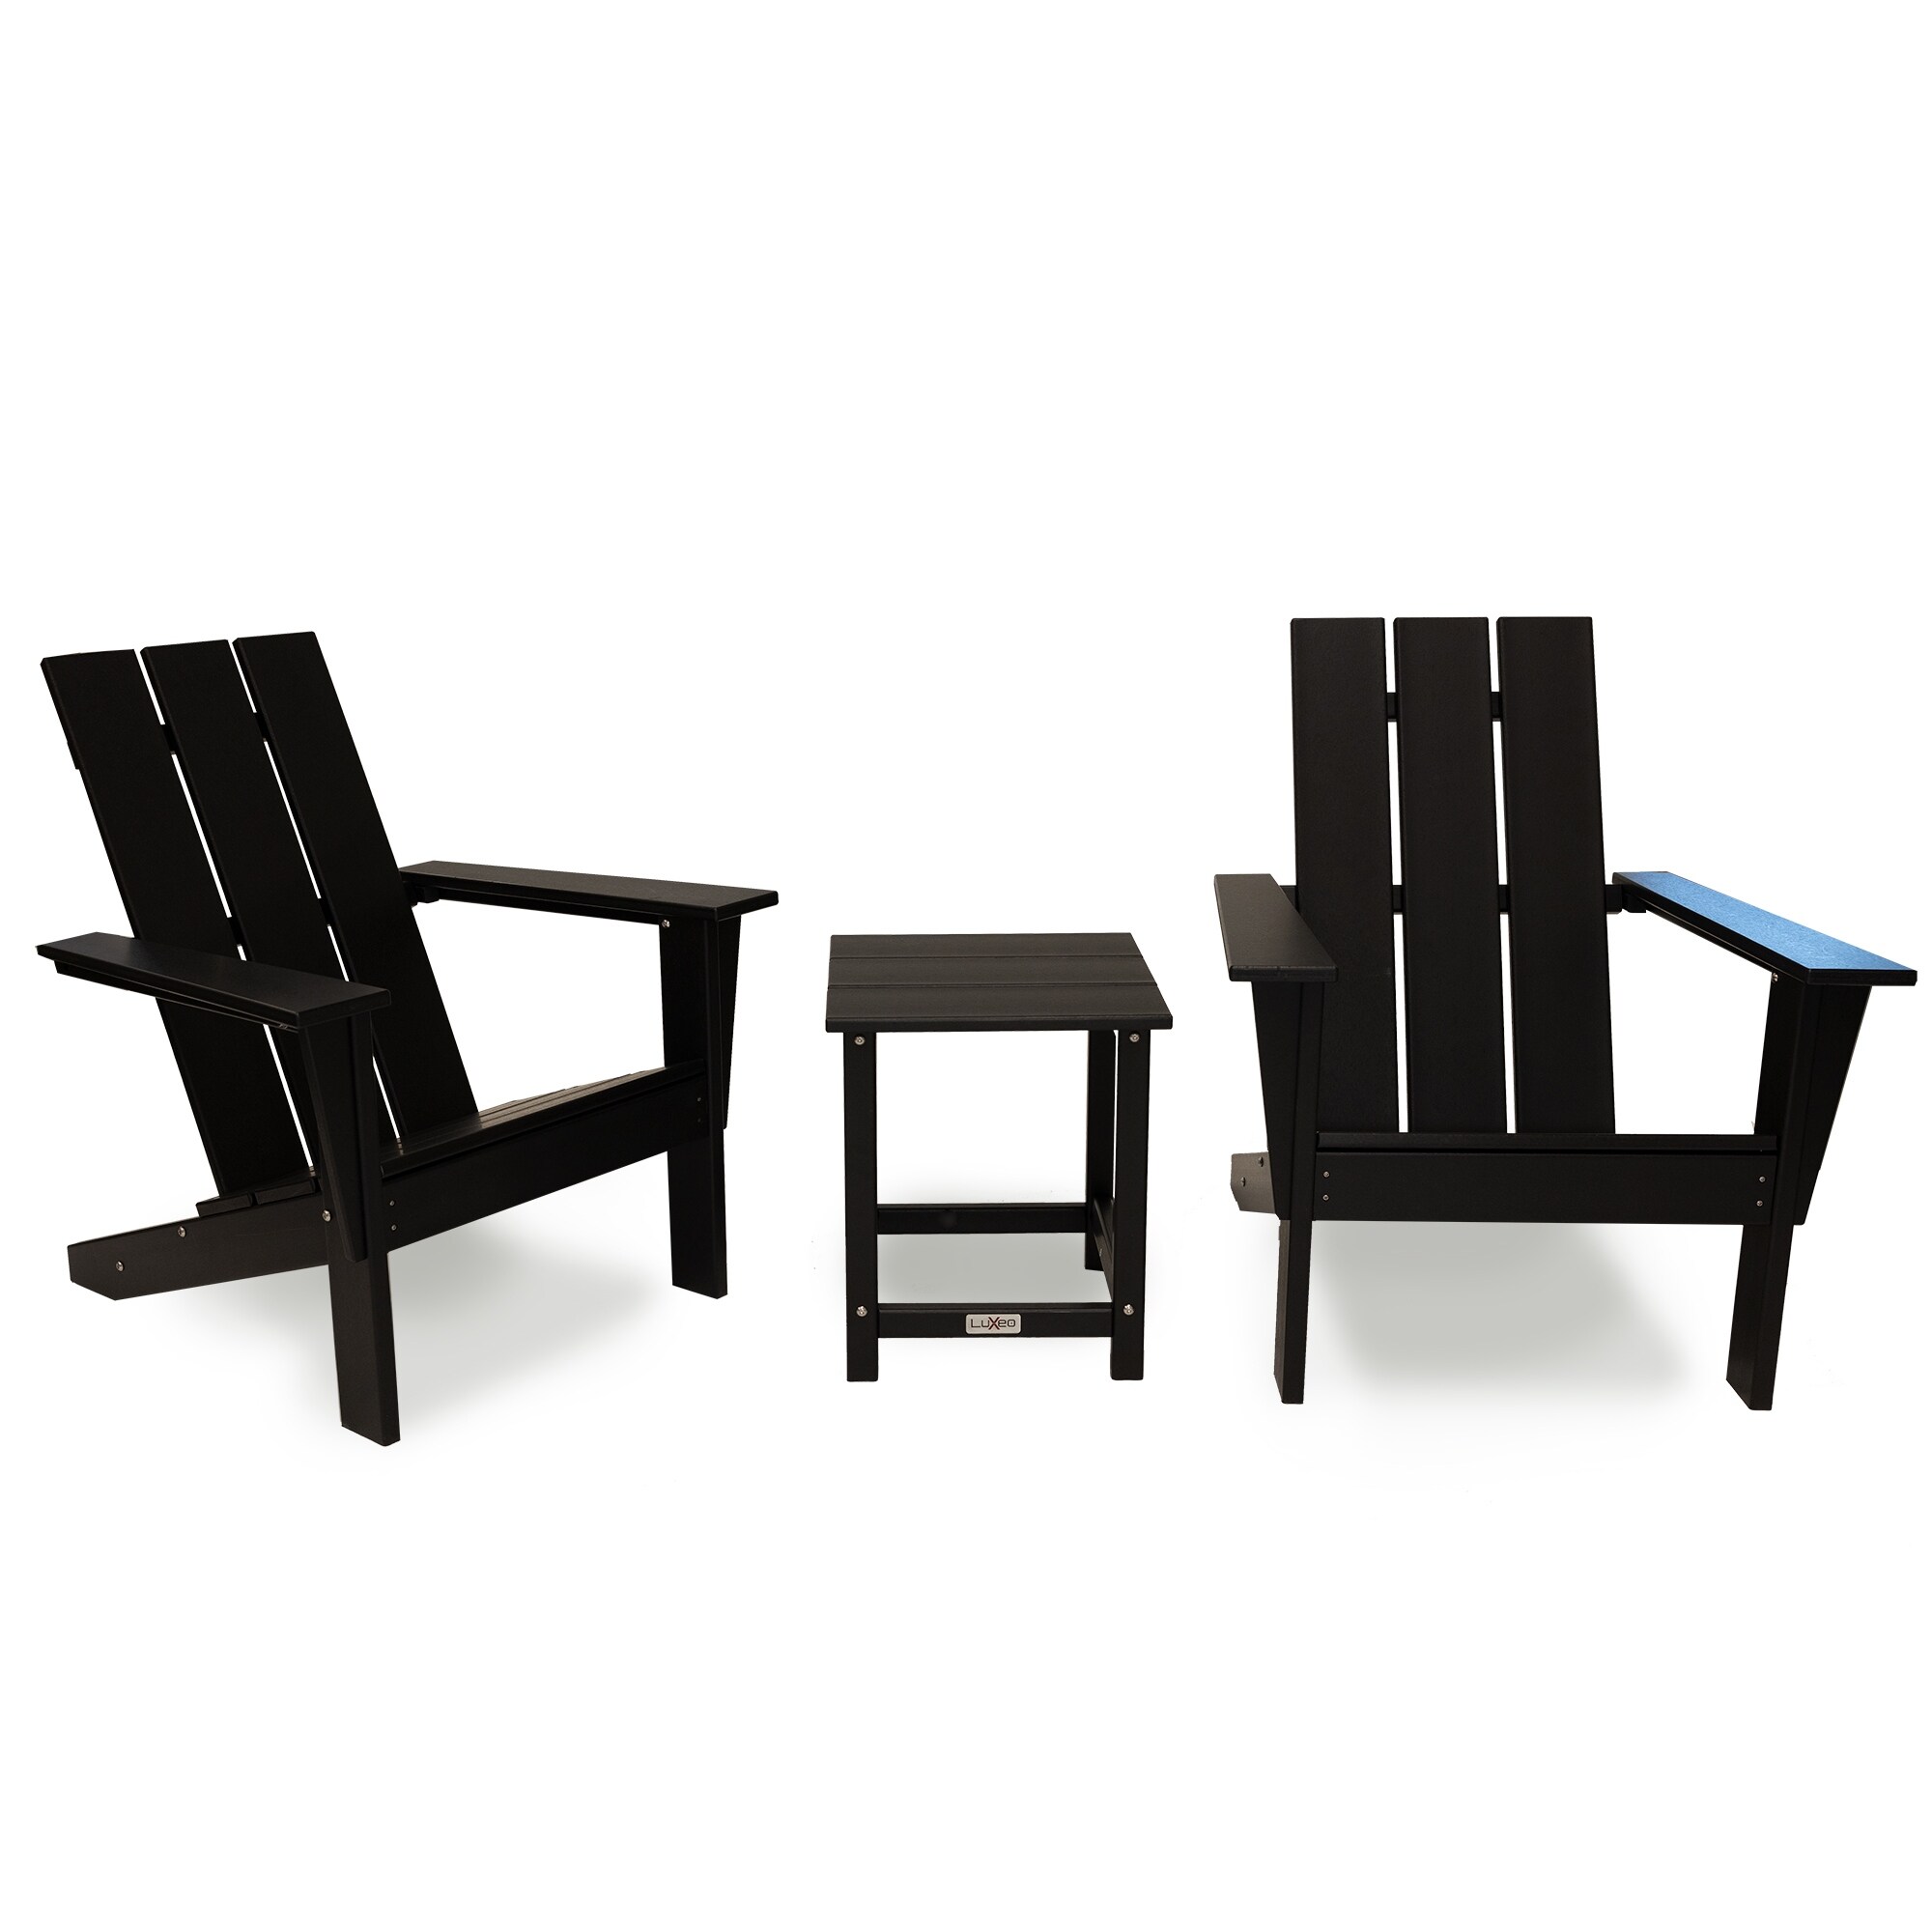 Arcadia Modern Outdoor Patio Adirondack Chair And Table Set